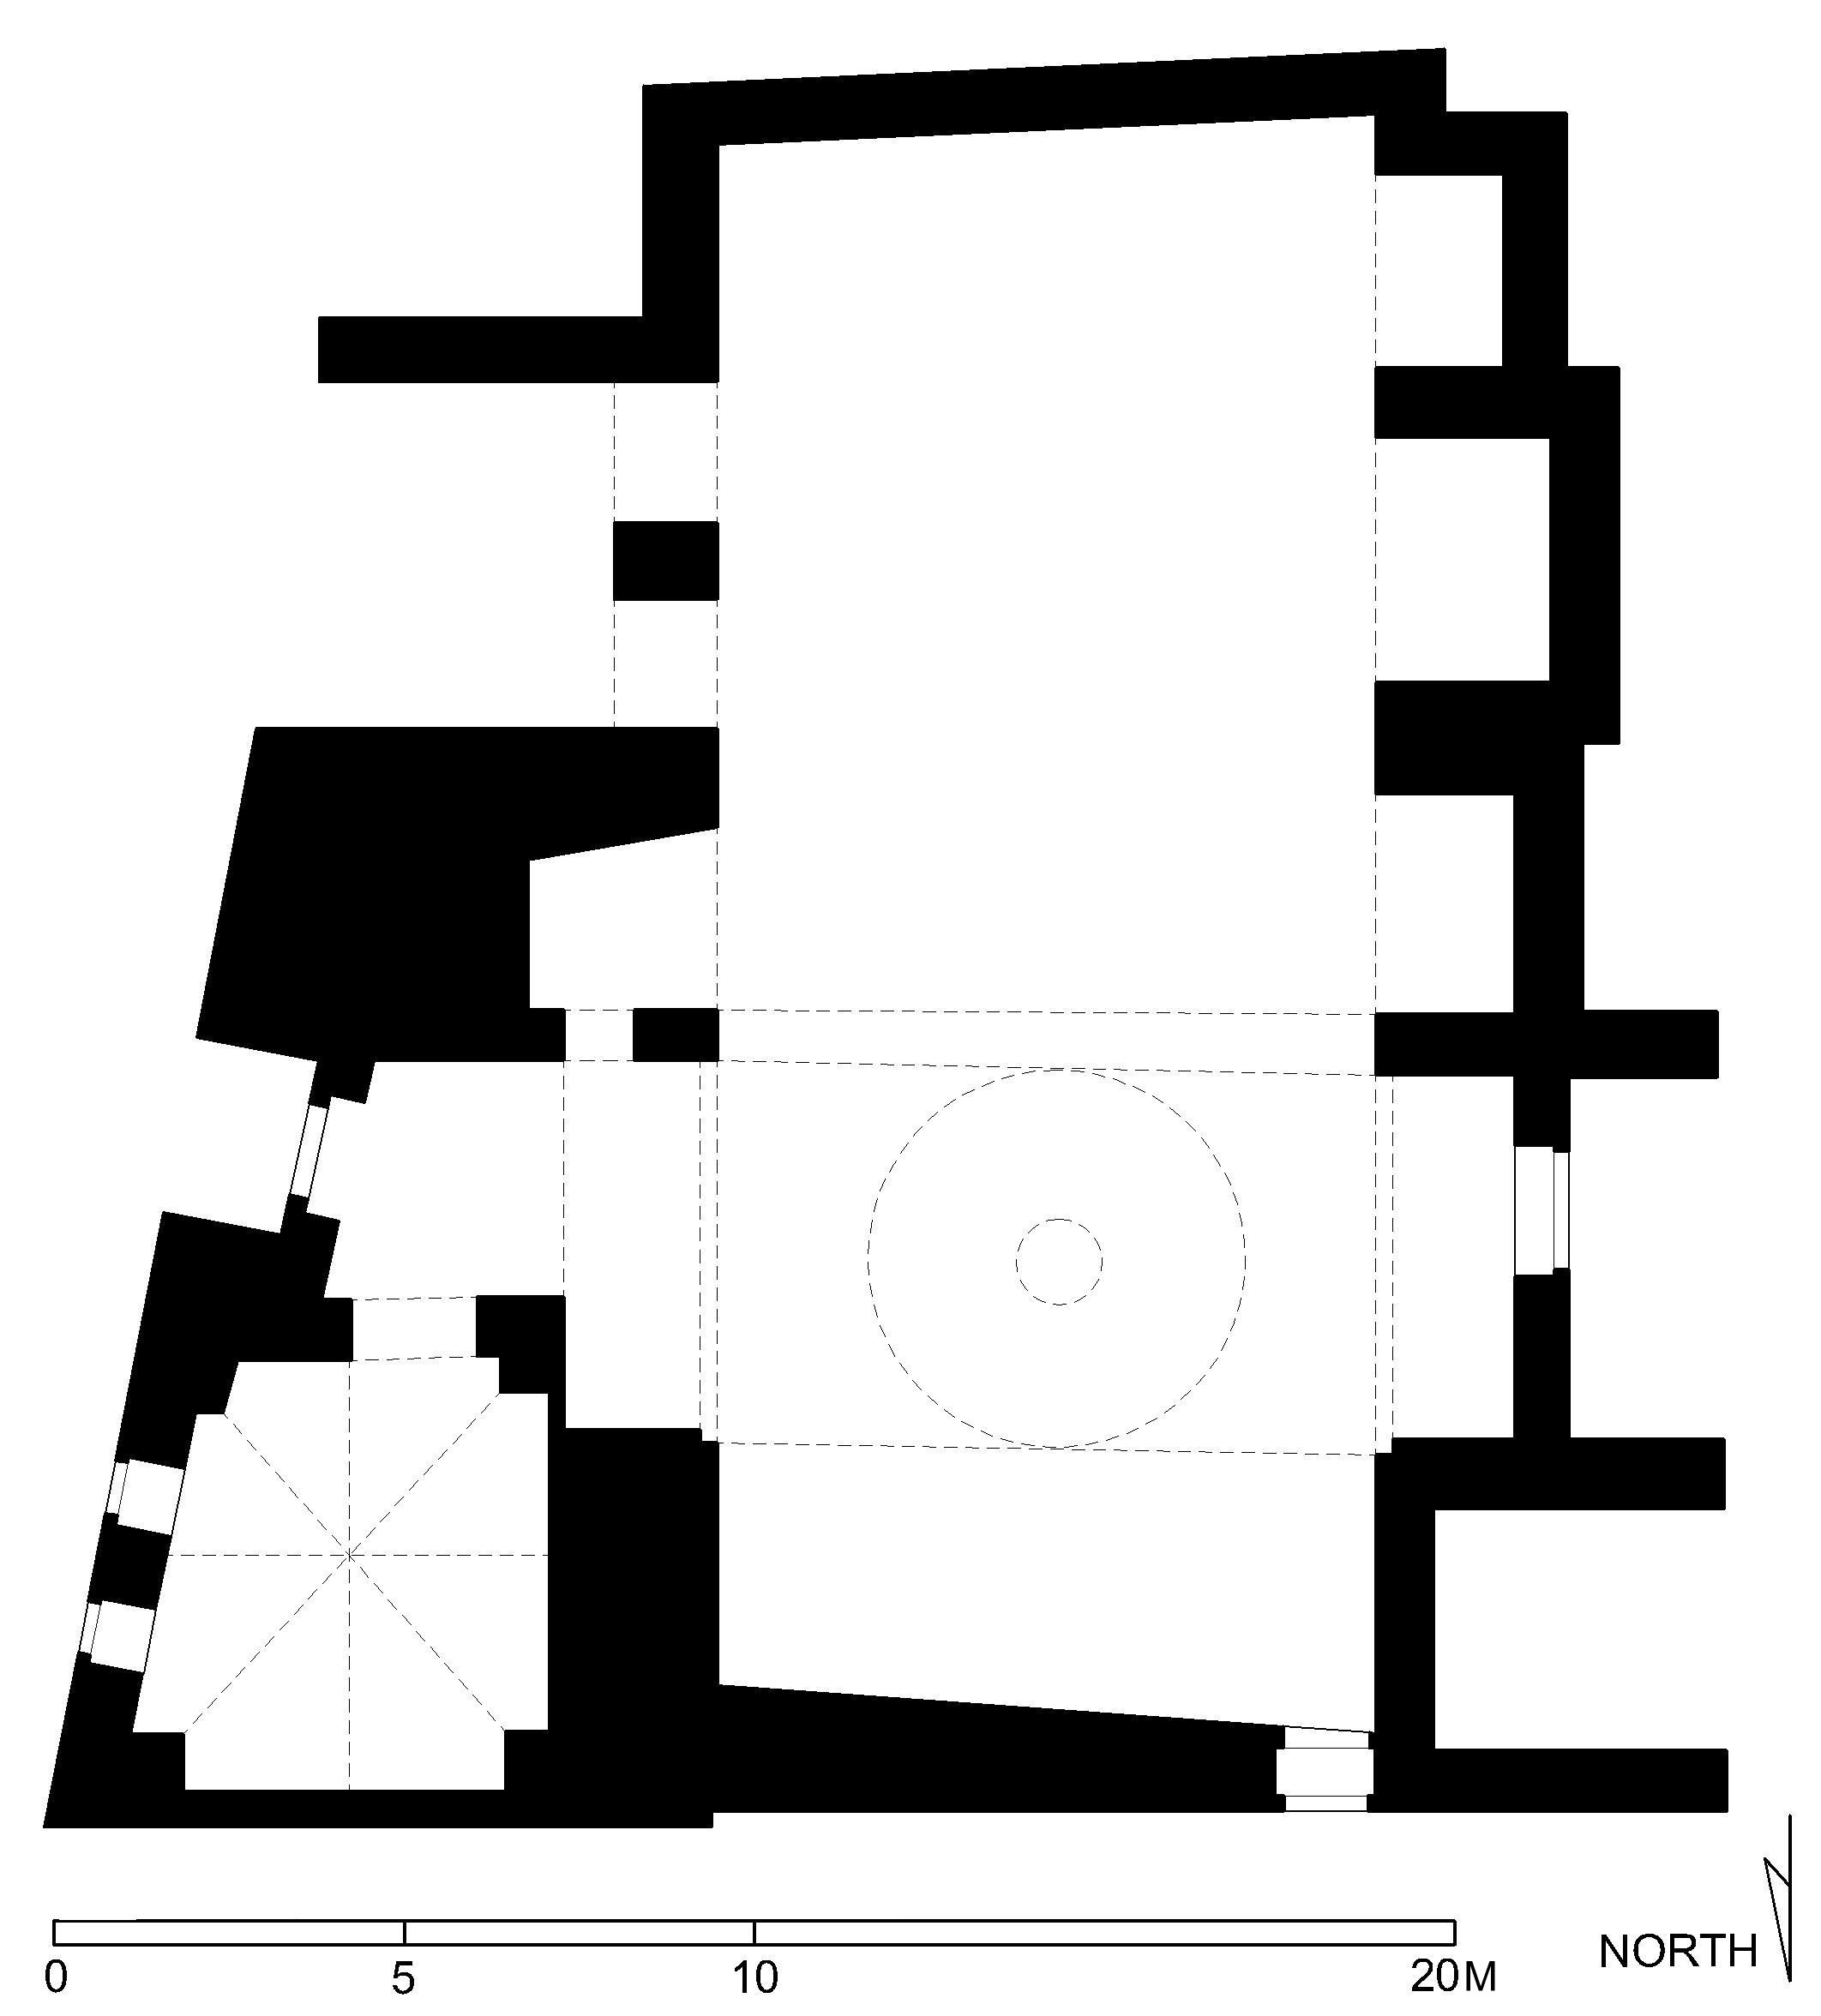 Jami' al-'Attar - Floor plan of mosque (after Meinecke) in AutoCAD 2000 format. Click the download button to download a zipped file containing the .dwg file. 